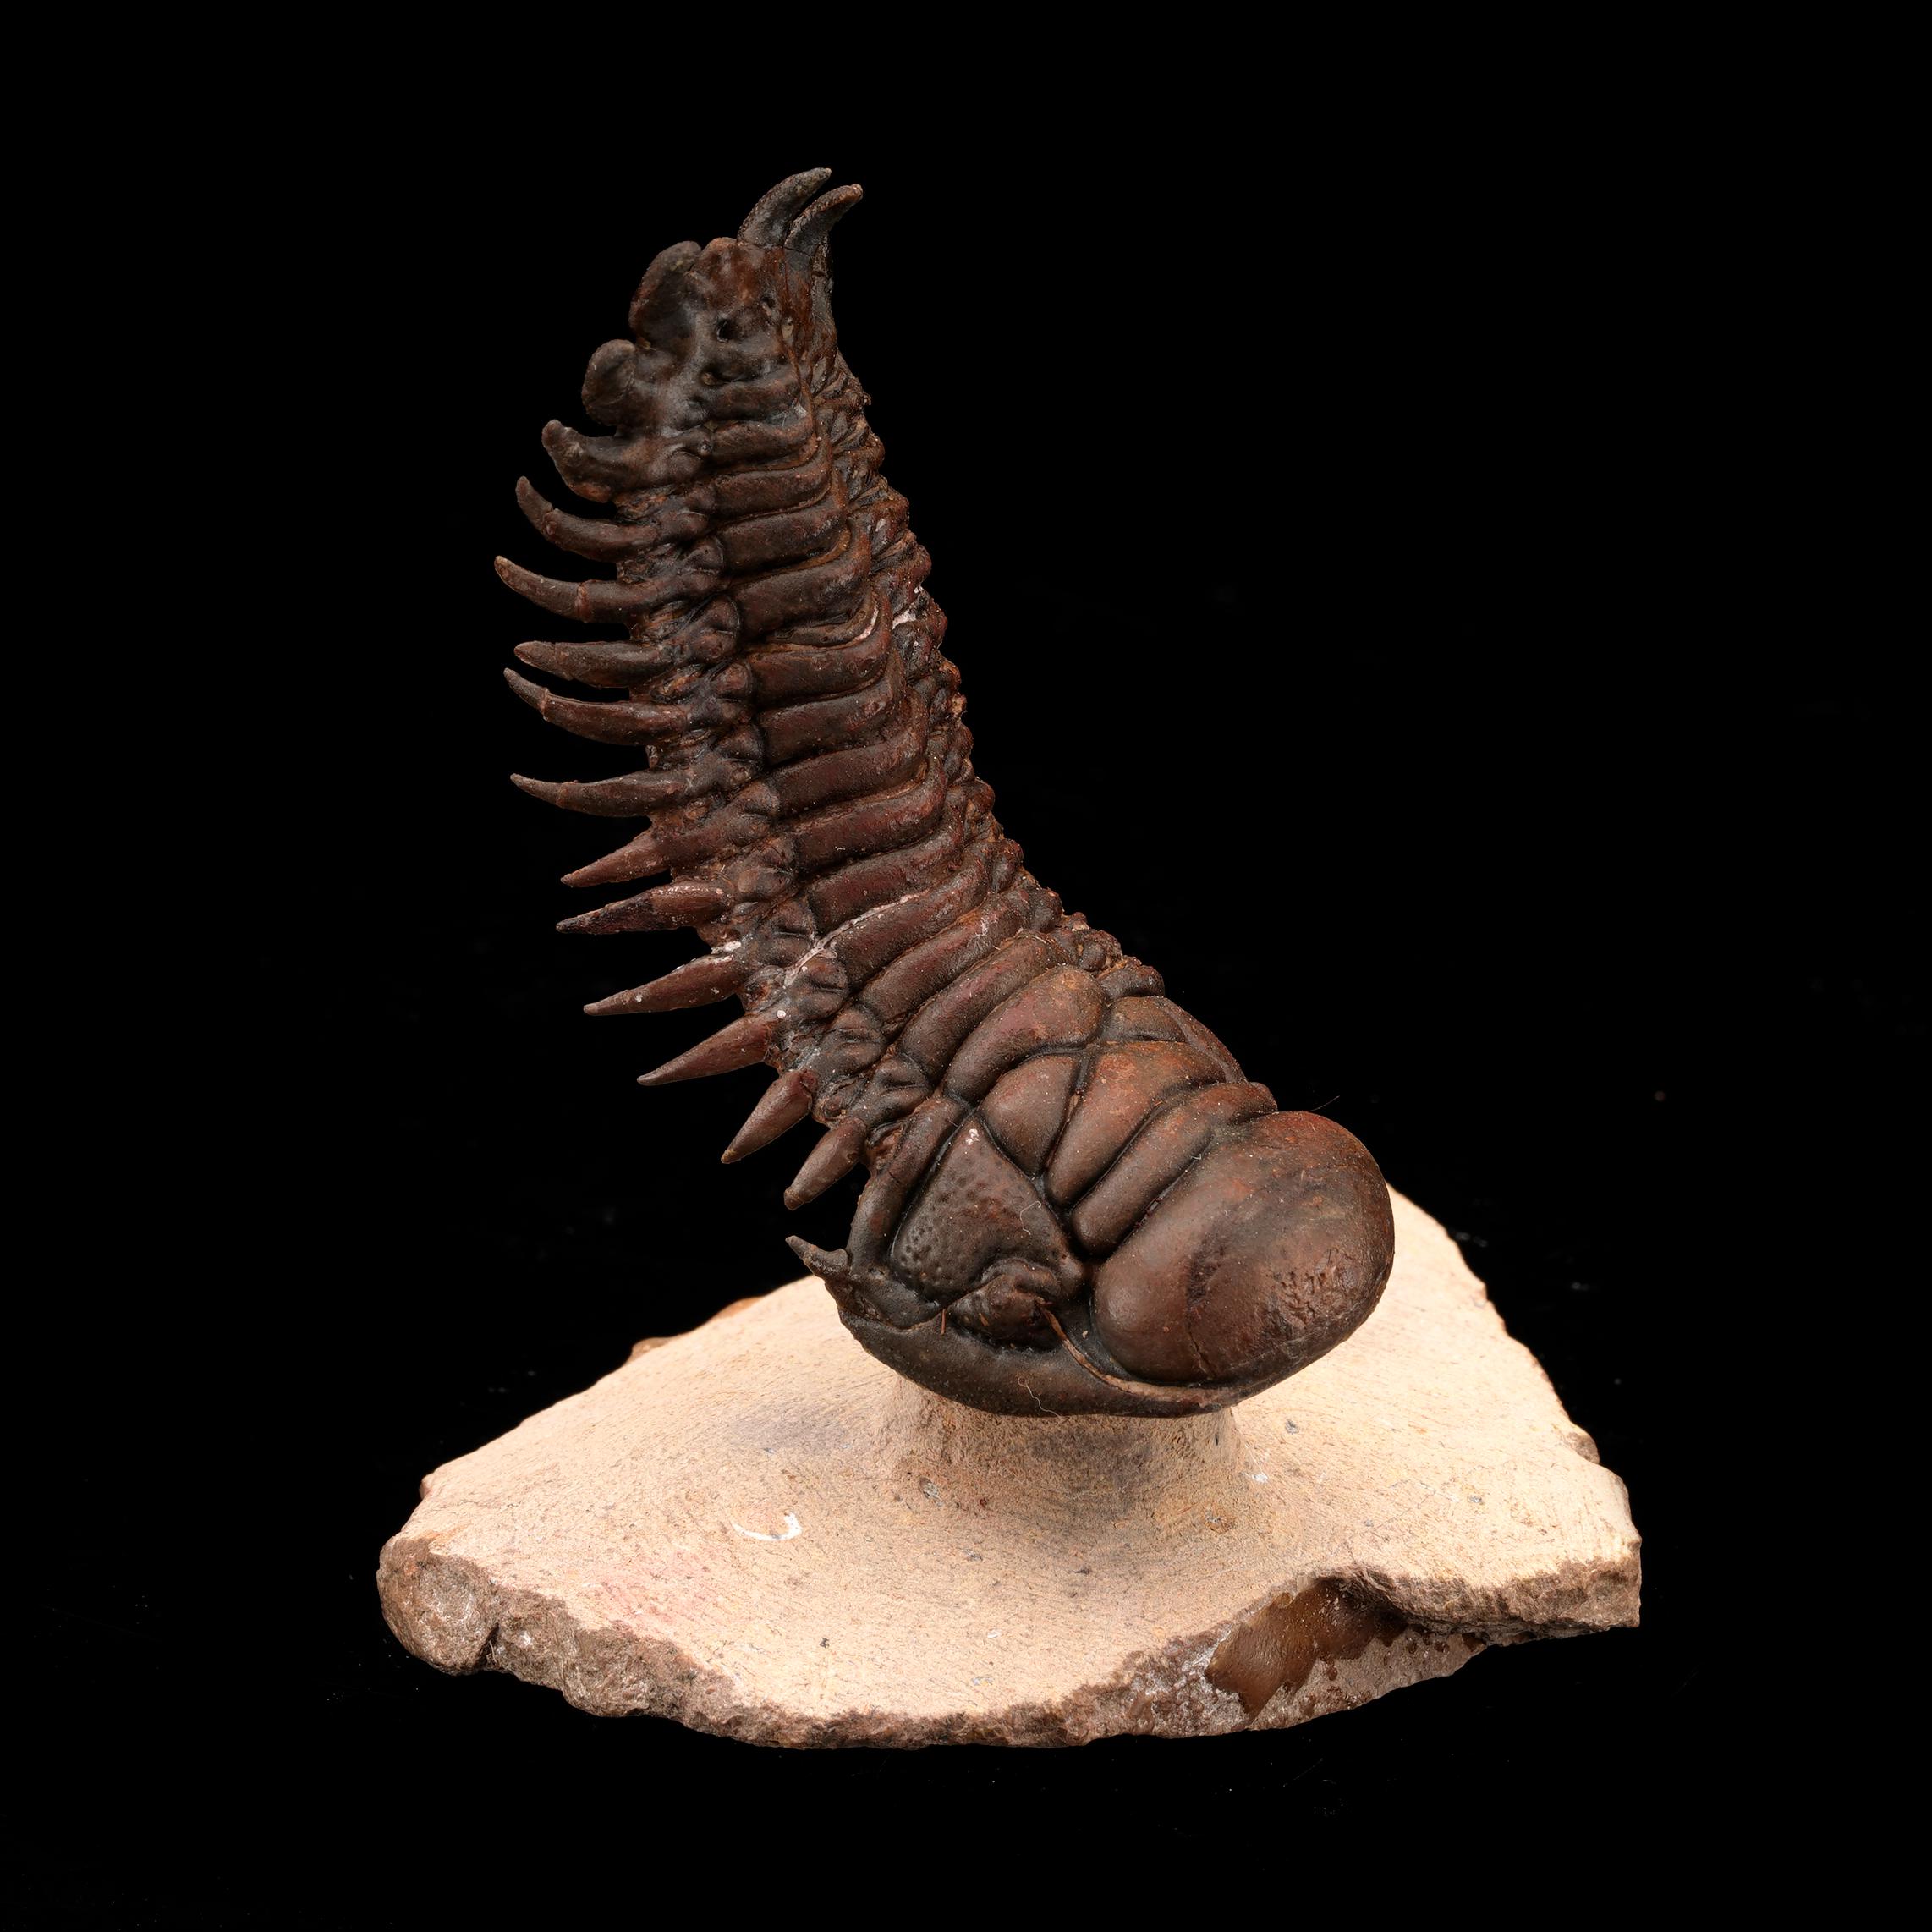 This 100% complete trilobite fossil of the species crotacephalina on its natural limestone matrix is estimated to date back as far as 400 million years. Out of Morocco, this specimen features intricate details of the hardy marine